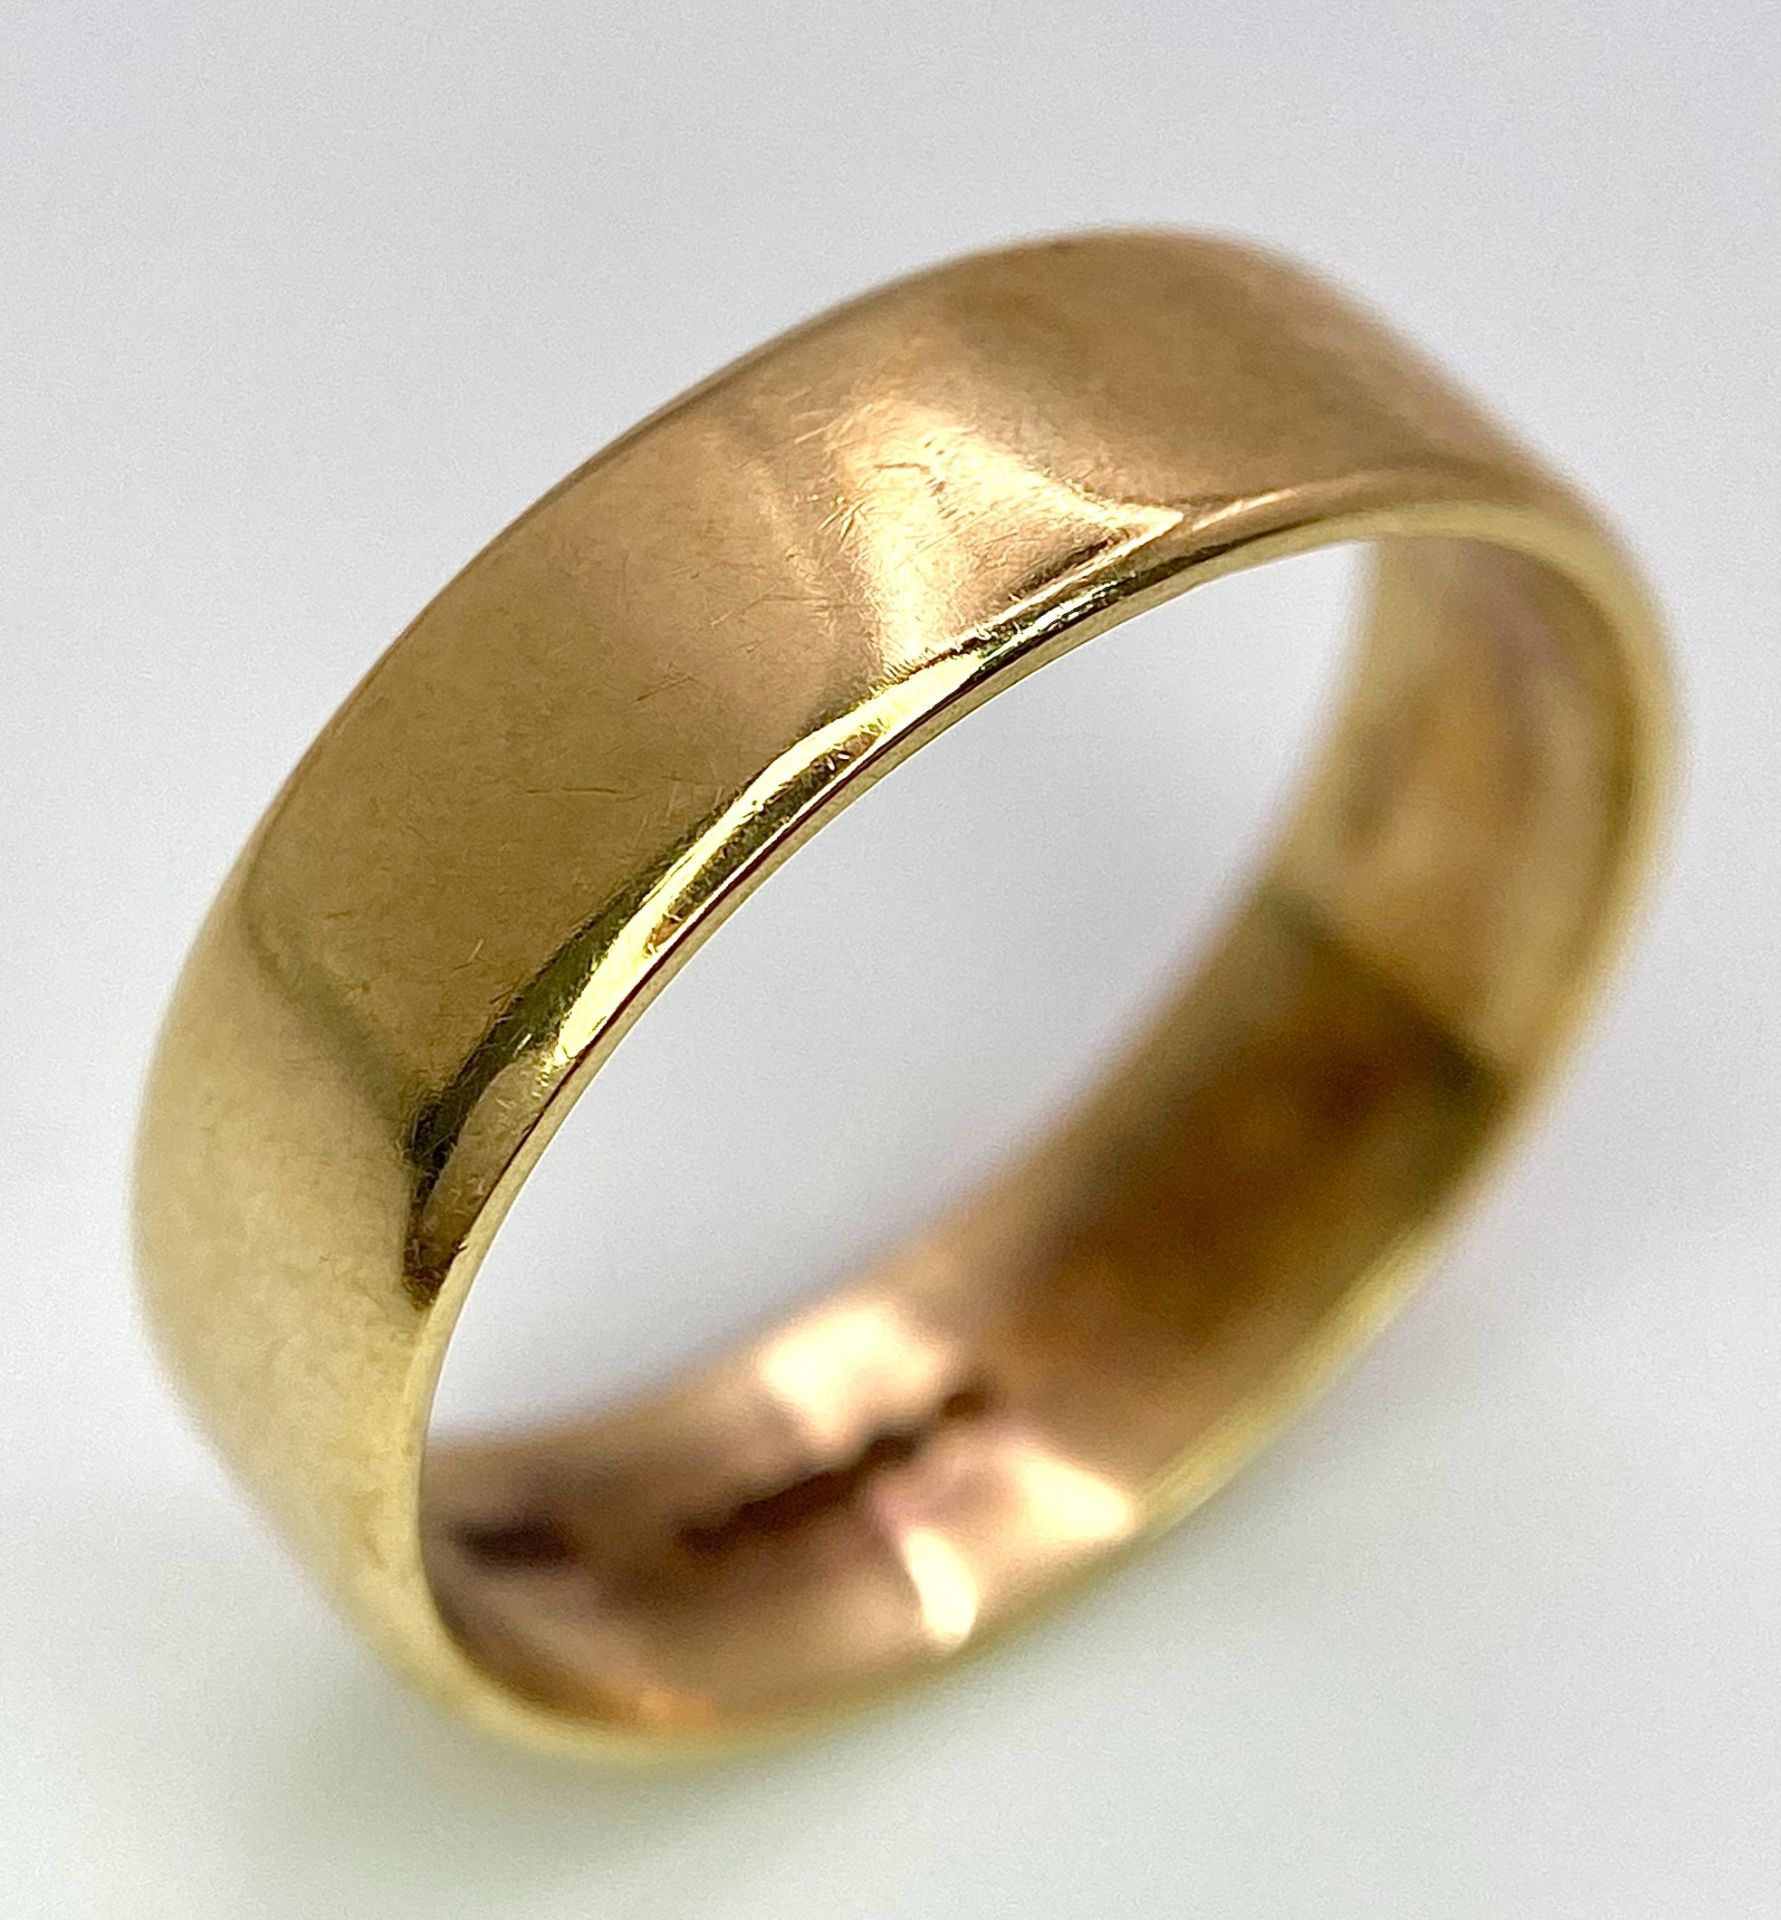 A Vintage 9K Yellow Gold Band Ring. 5mm width. 3.6g weight. Full UK hallmarks.